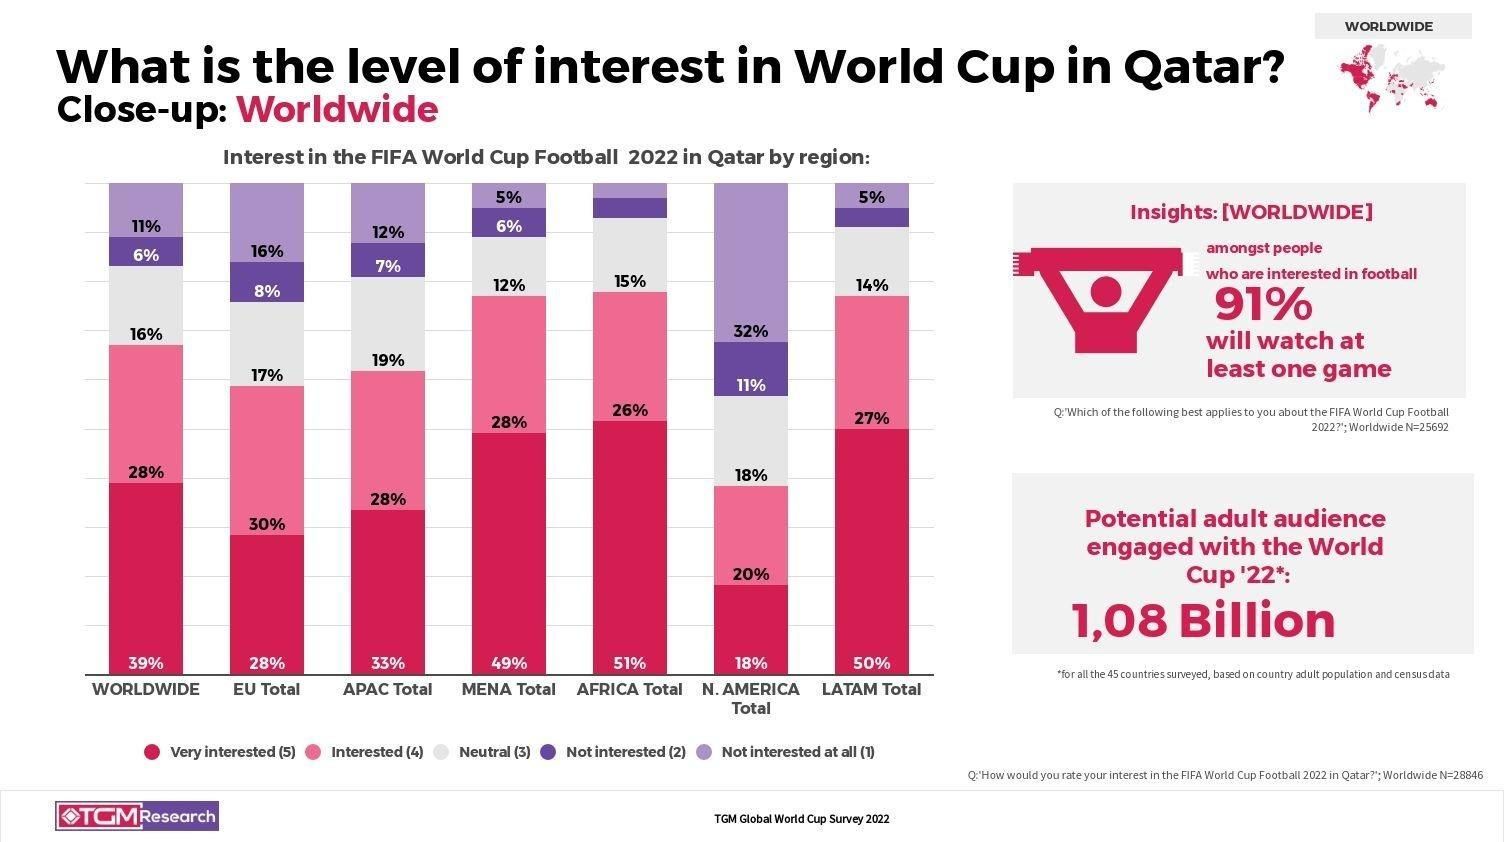 Level of interest in Qatar Football World Cup 2022 - Global insights from TGM World Cup Global Survey